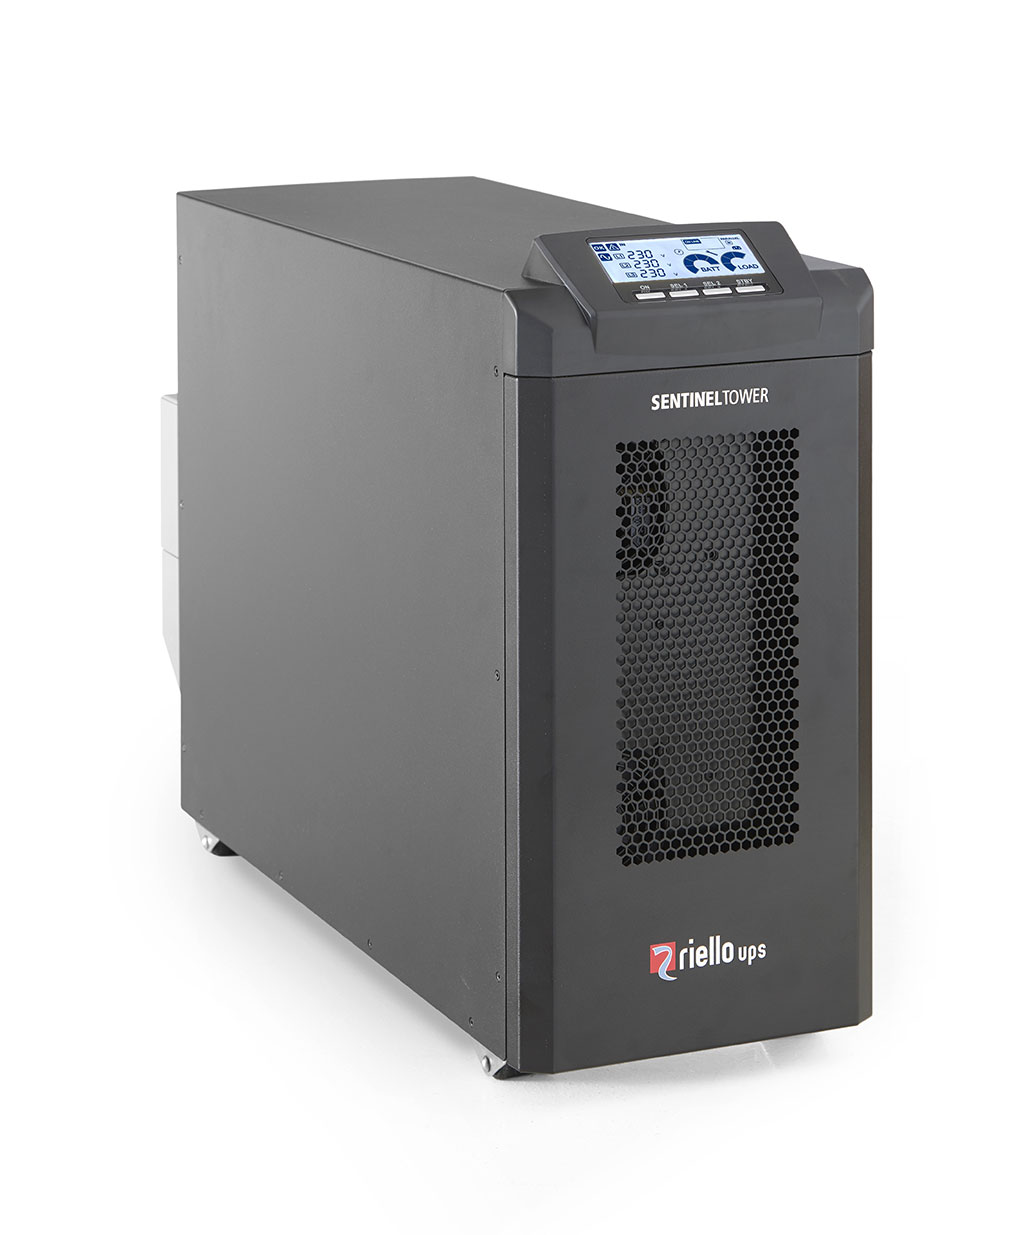 Riello STW 10000, Sentinel Tower, online double conversion, 10 KVA 1/1, 3/1, 400/230 Vac, 50Hz, UPS system, 10 min backup time